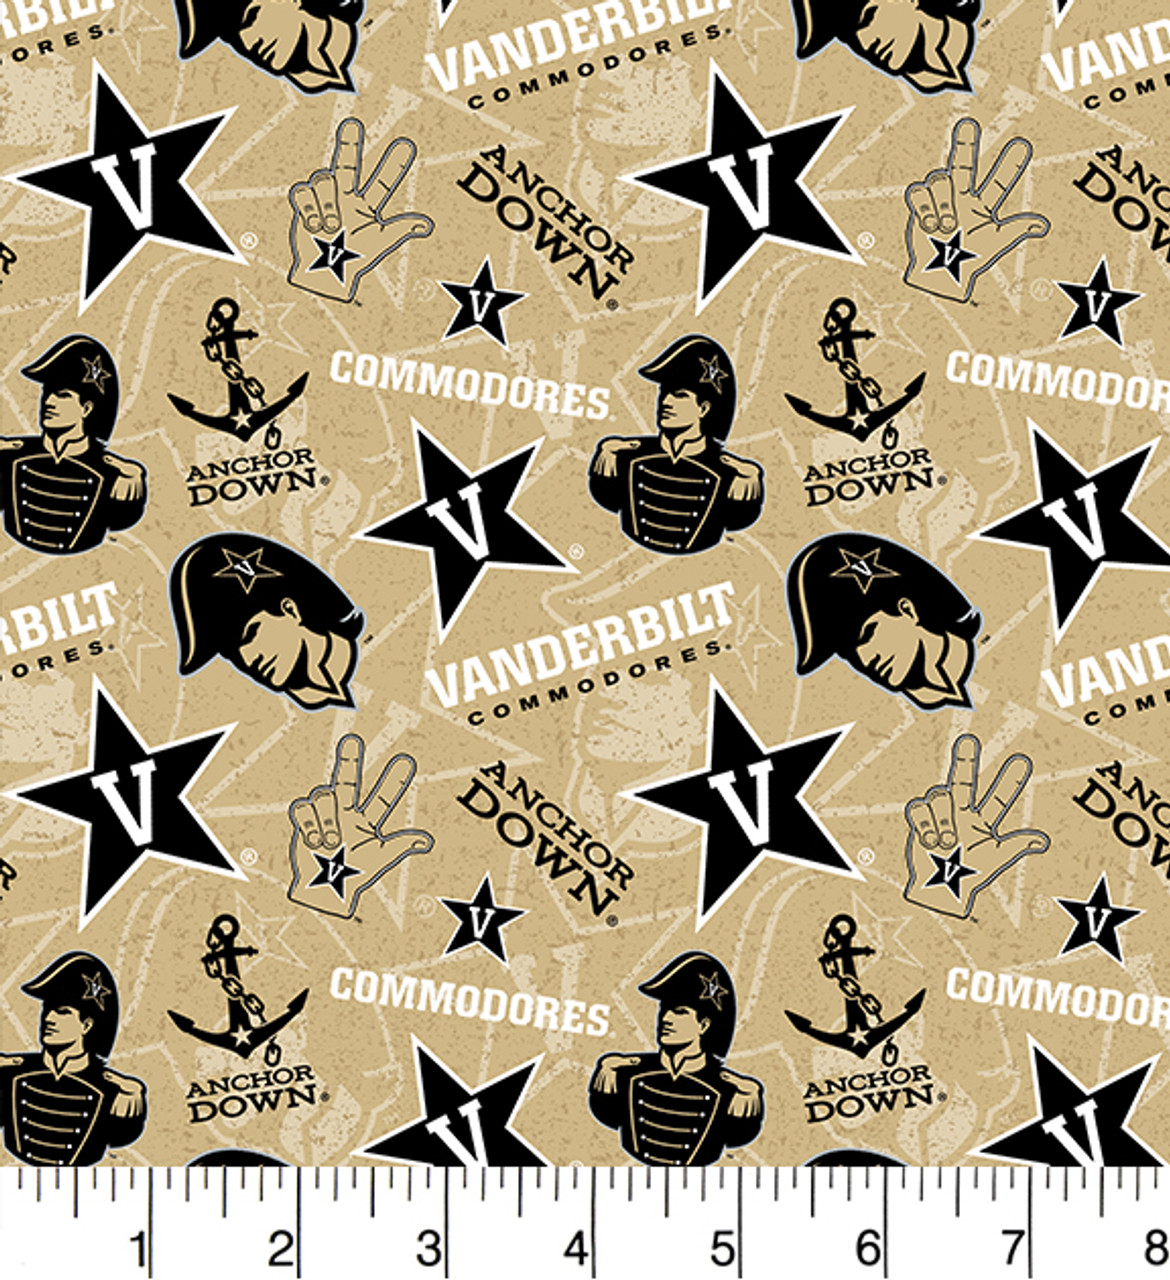 Vanderbilt University Commodores Cotton Fabric with Tone On Tone Print or Matching Solid Cotton Fabrics